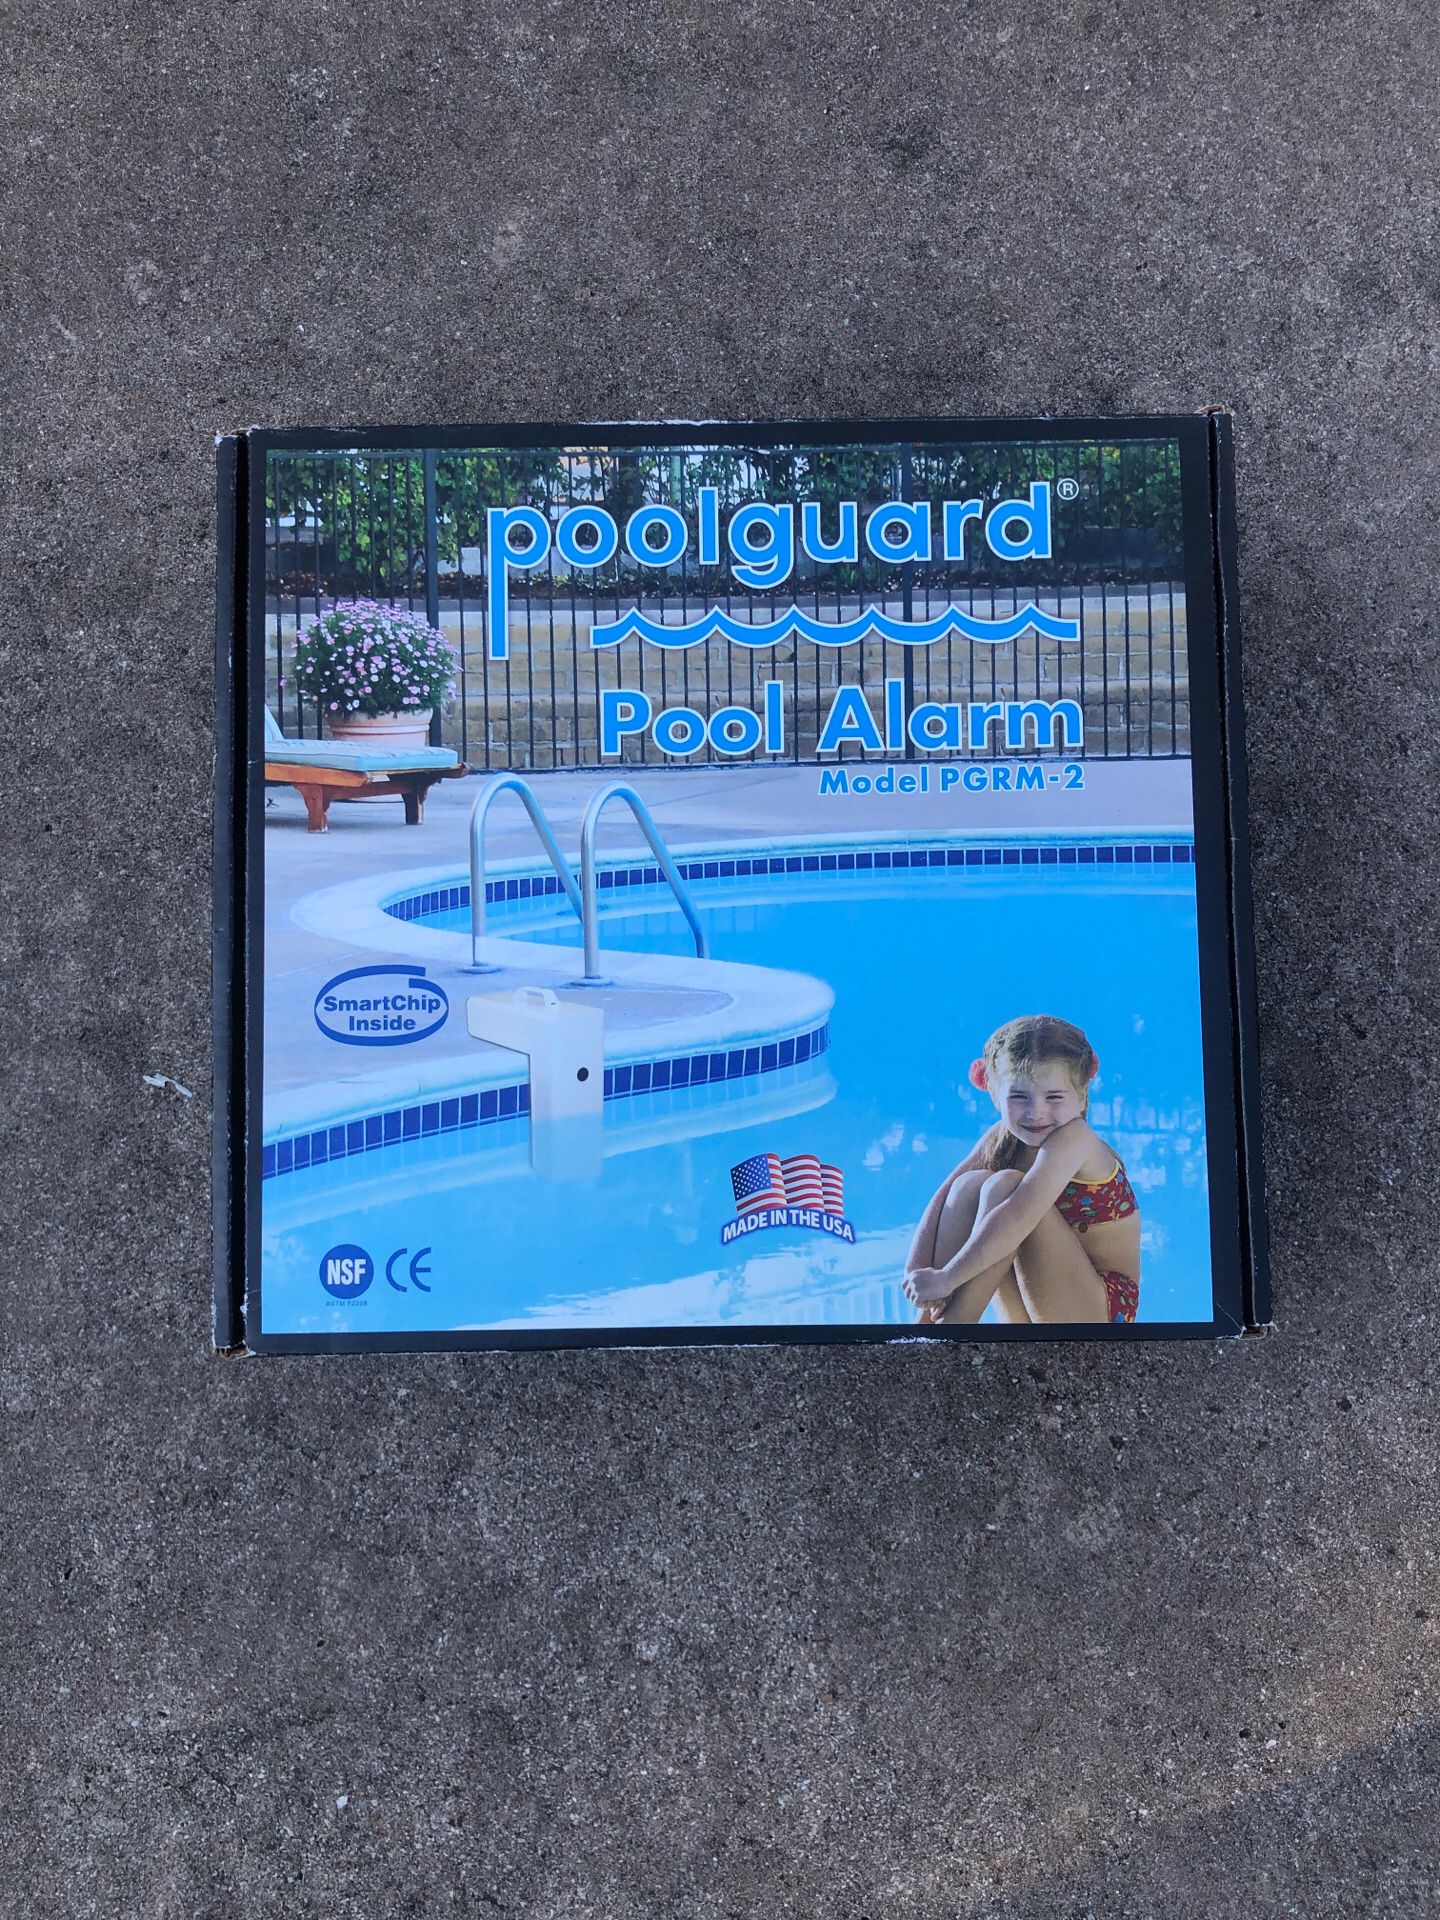 Pool alarm in box and never been used.